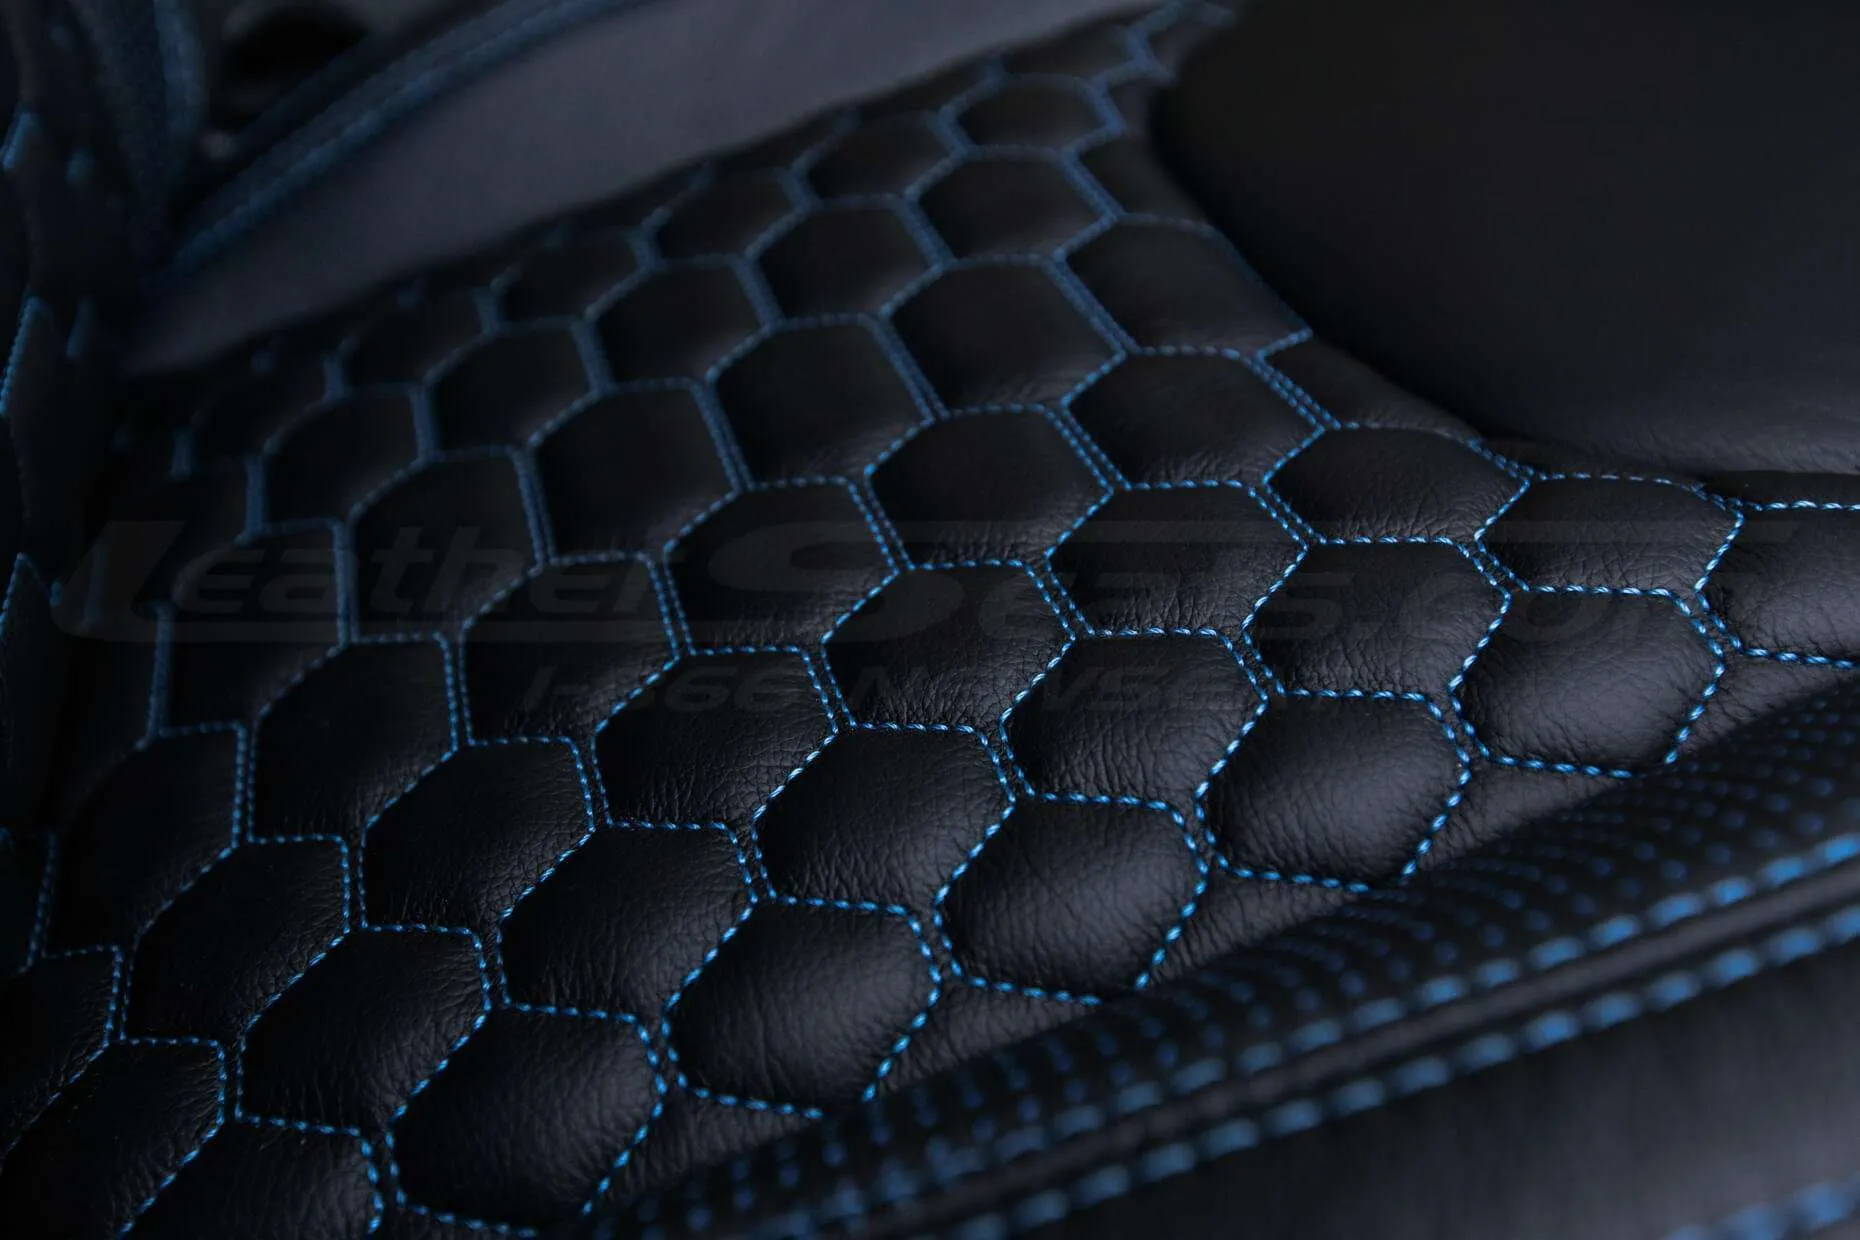 2013-2018 Jeep Wrangler Bespoked Leather Seats Installed- Black & Cobalt - CNC Stitched Reticulated Hex close-up